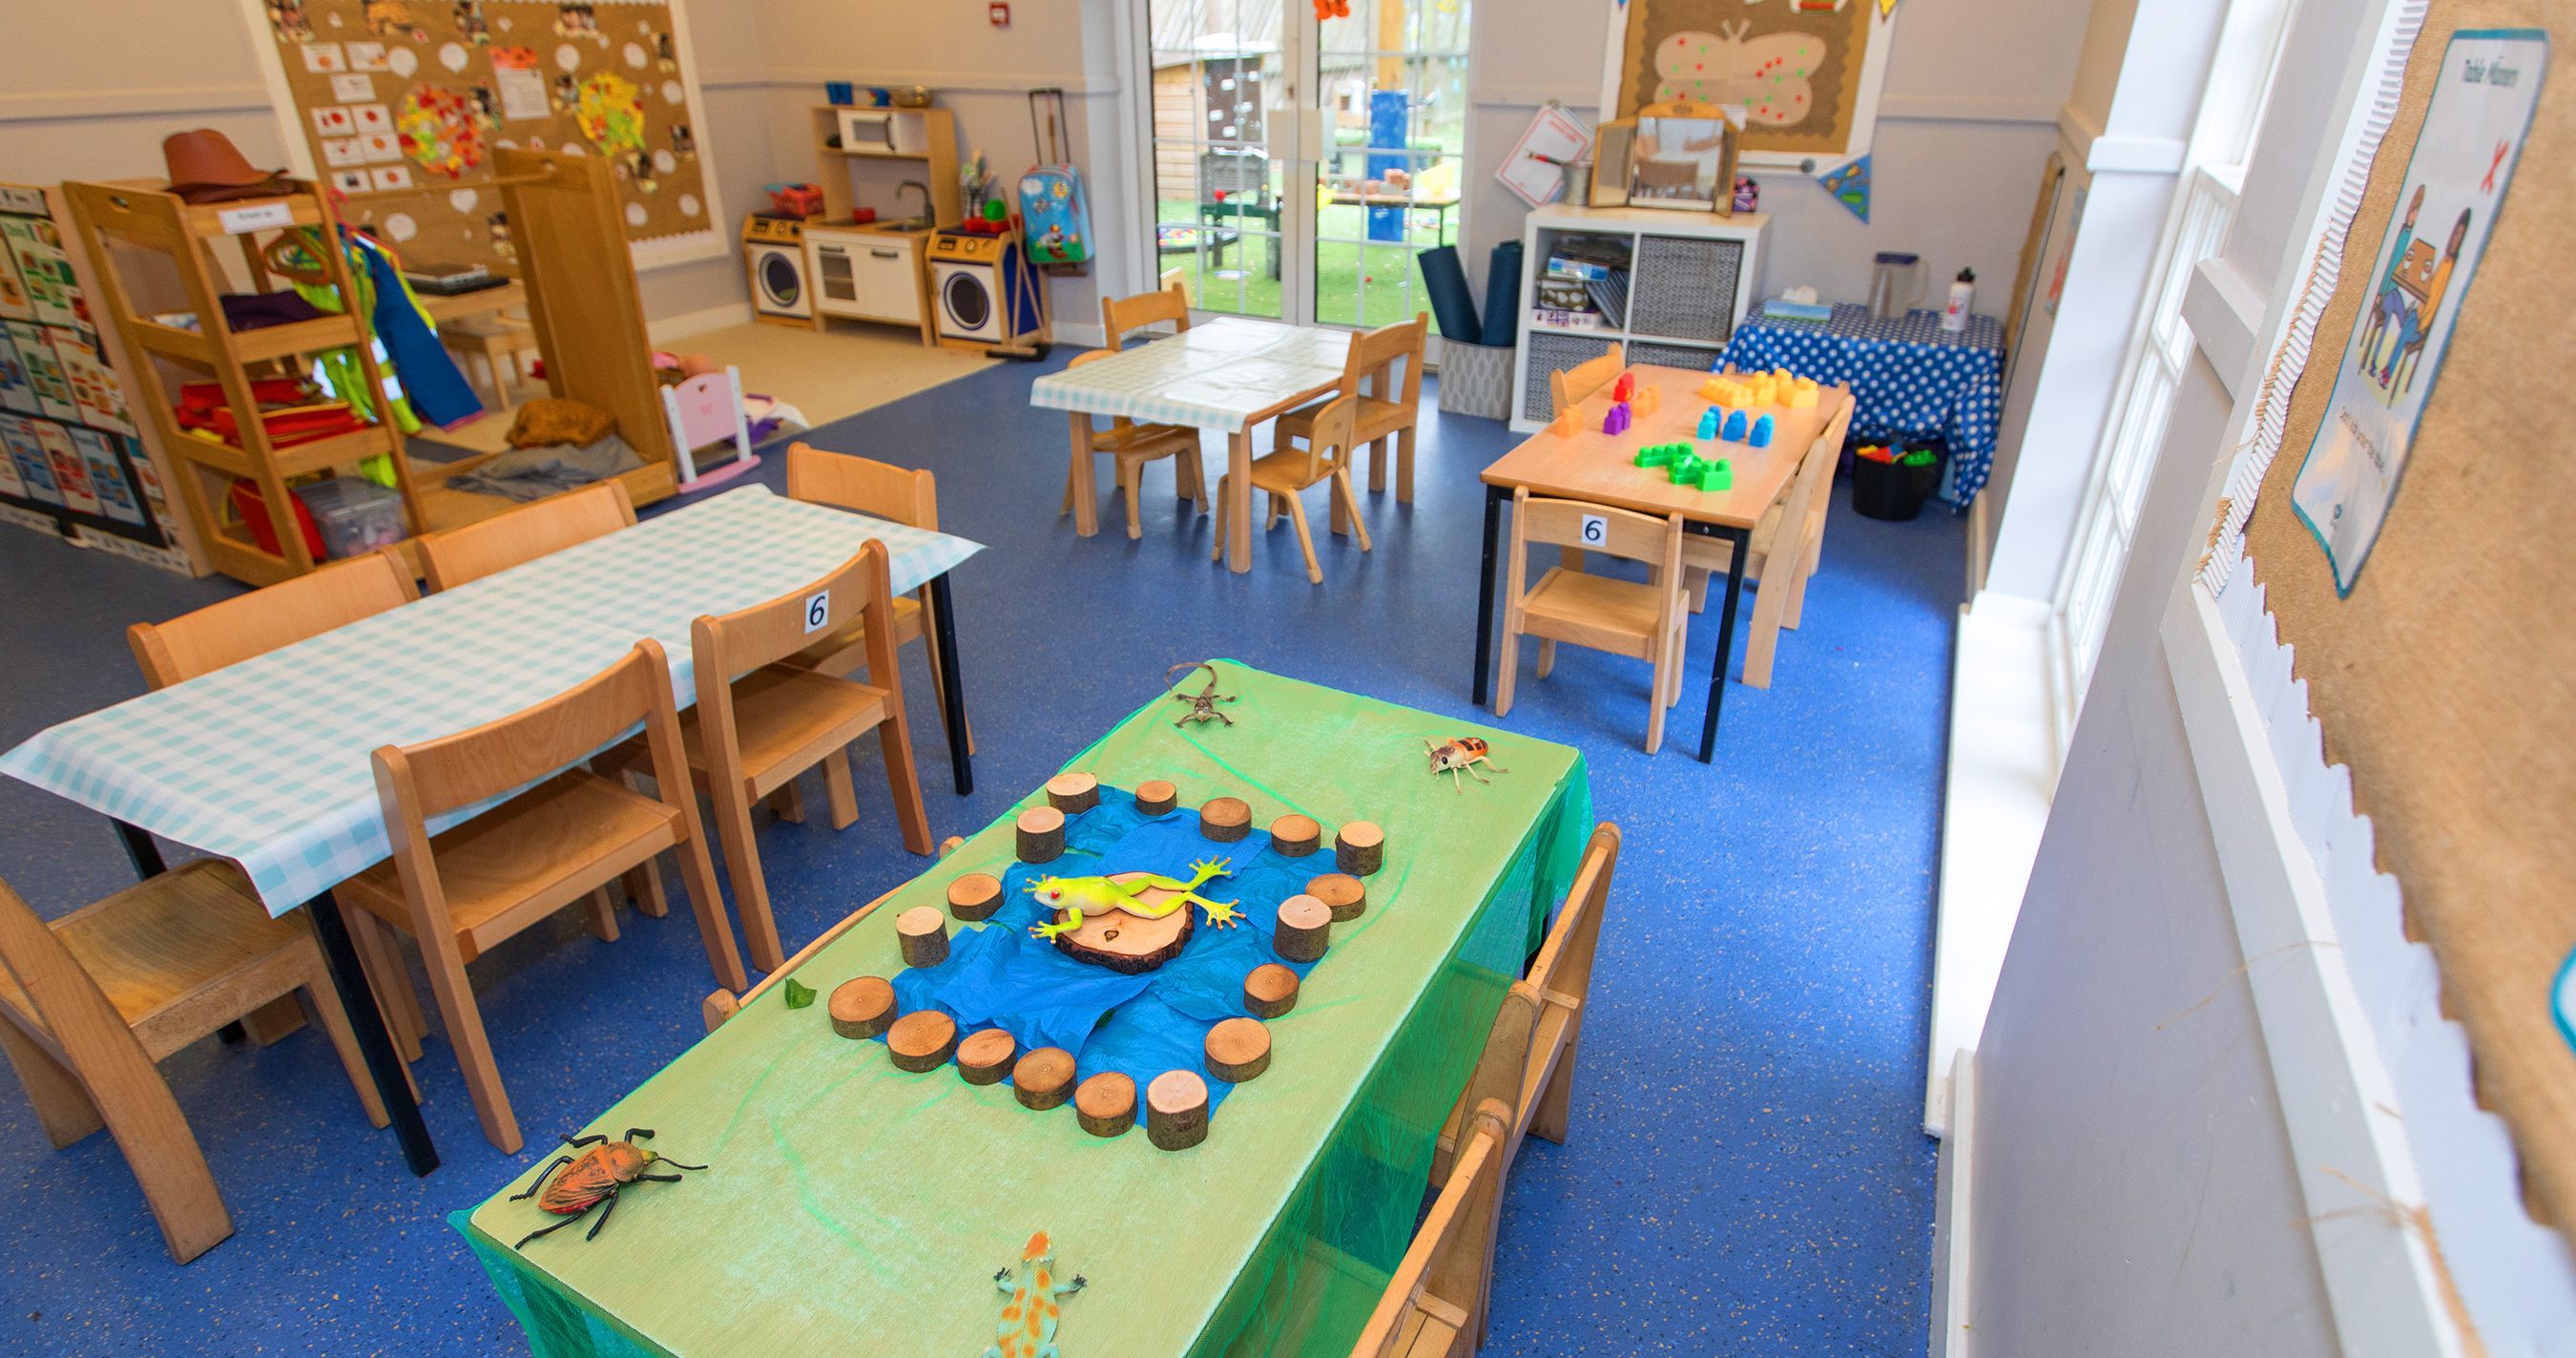 Images Busy Bees Nursery at Enfield Highlands Village